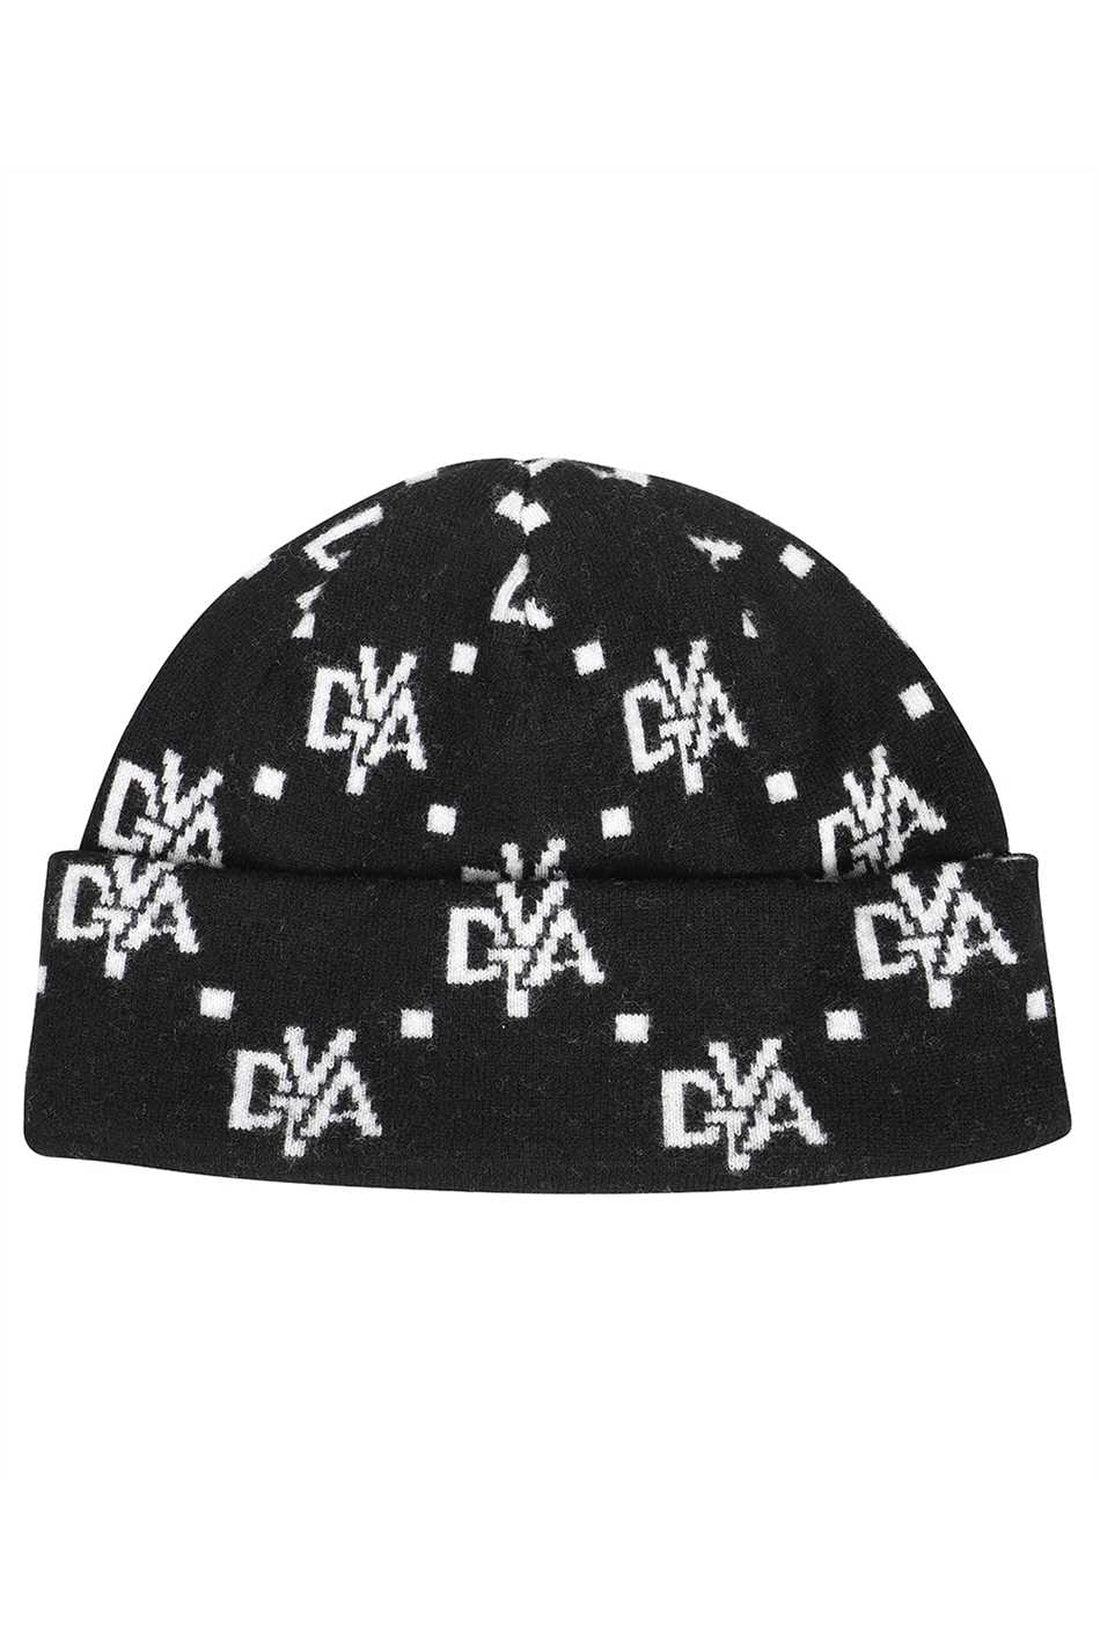 Duvetica-OUTLET-SALE-Saladino knitted beanie-ARCHIVIST